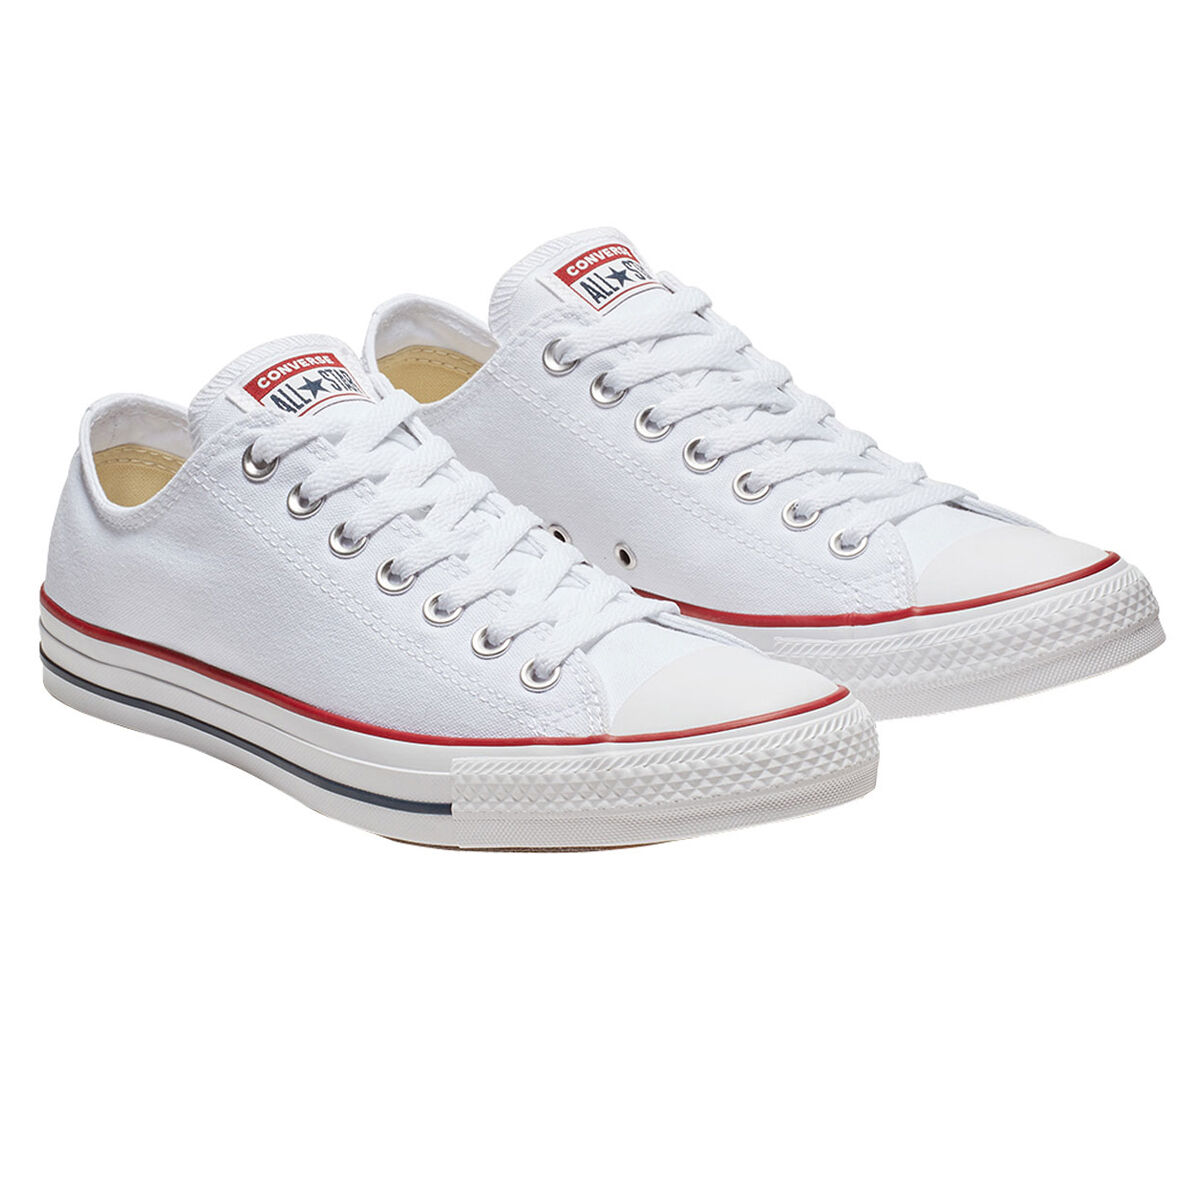 mens converse white low tops